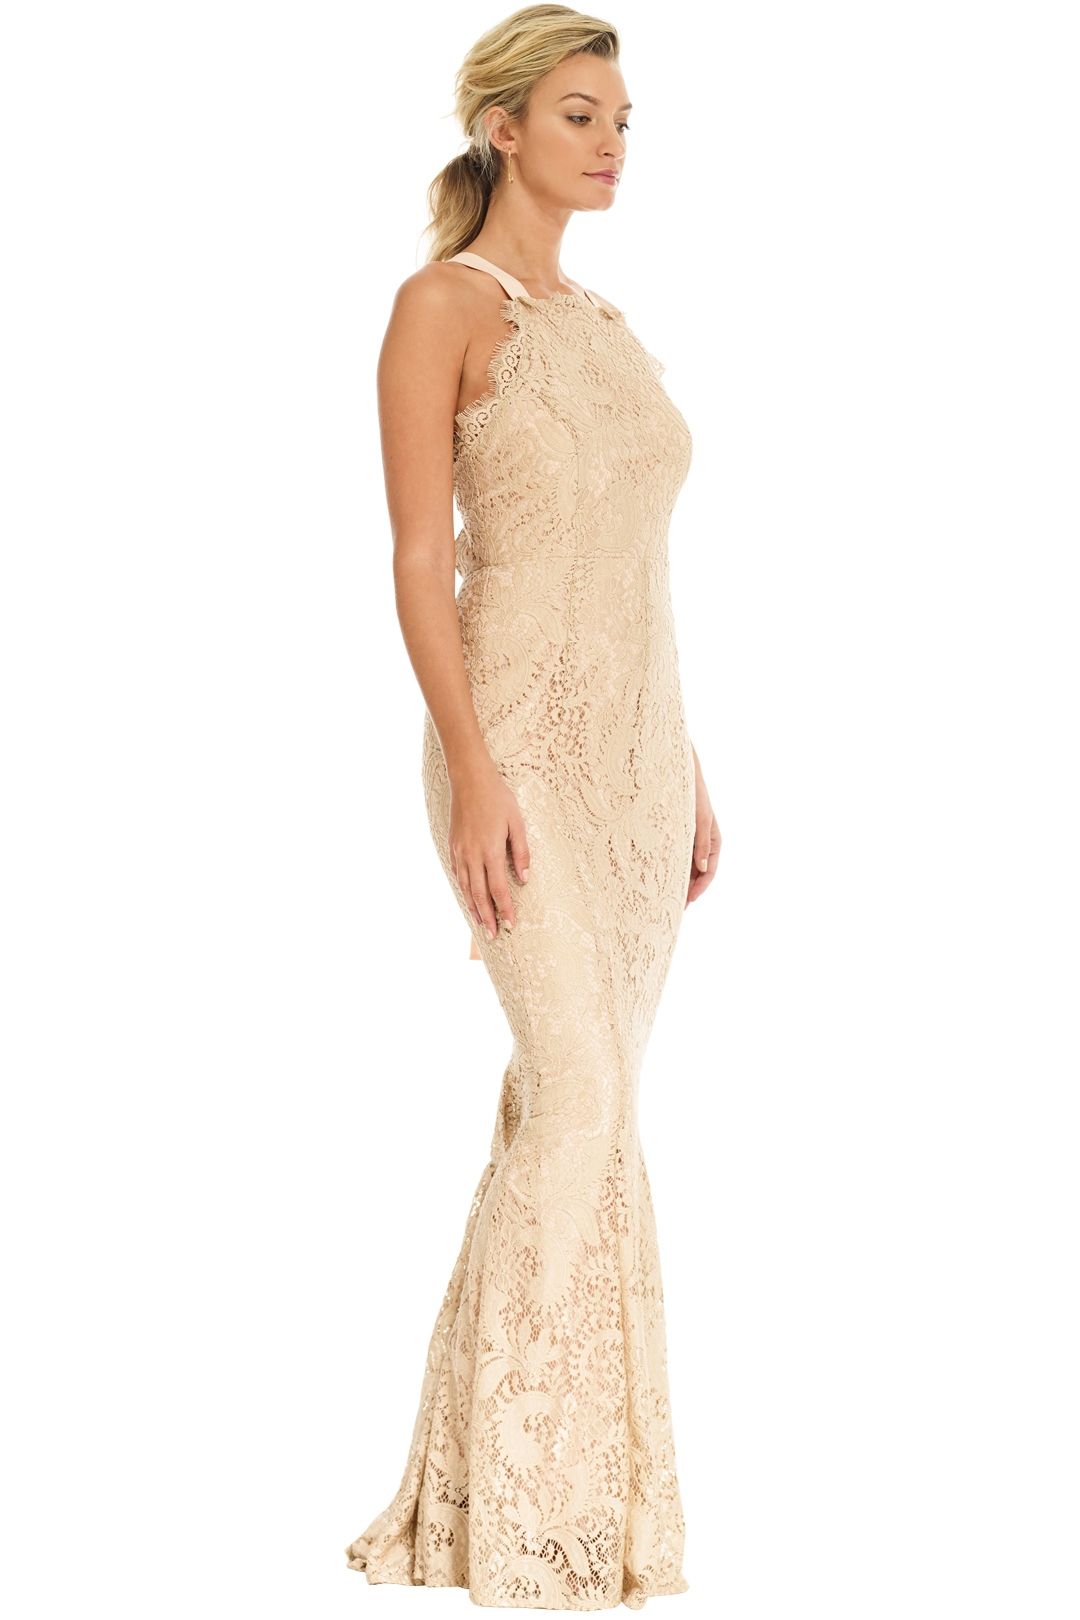 Grace and Hart - Mystic Lace Cross Back Gown - Nude - Side